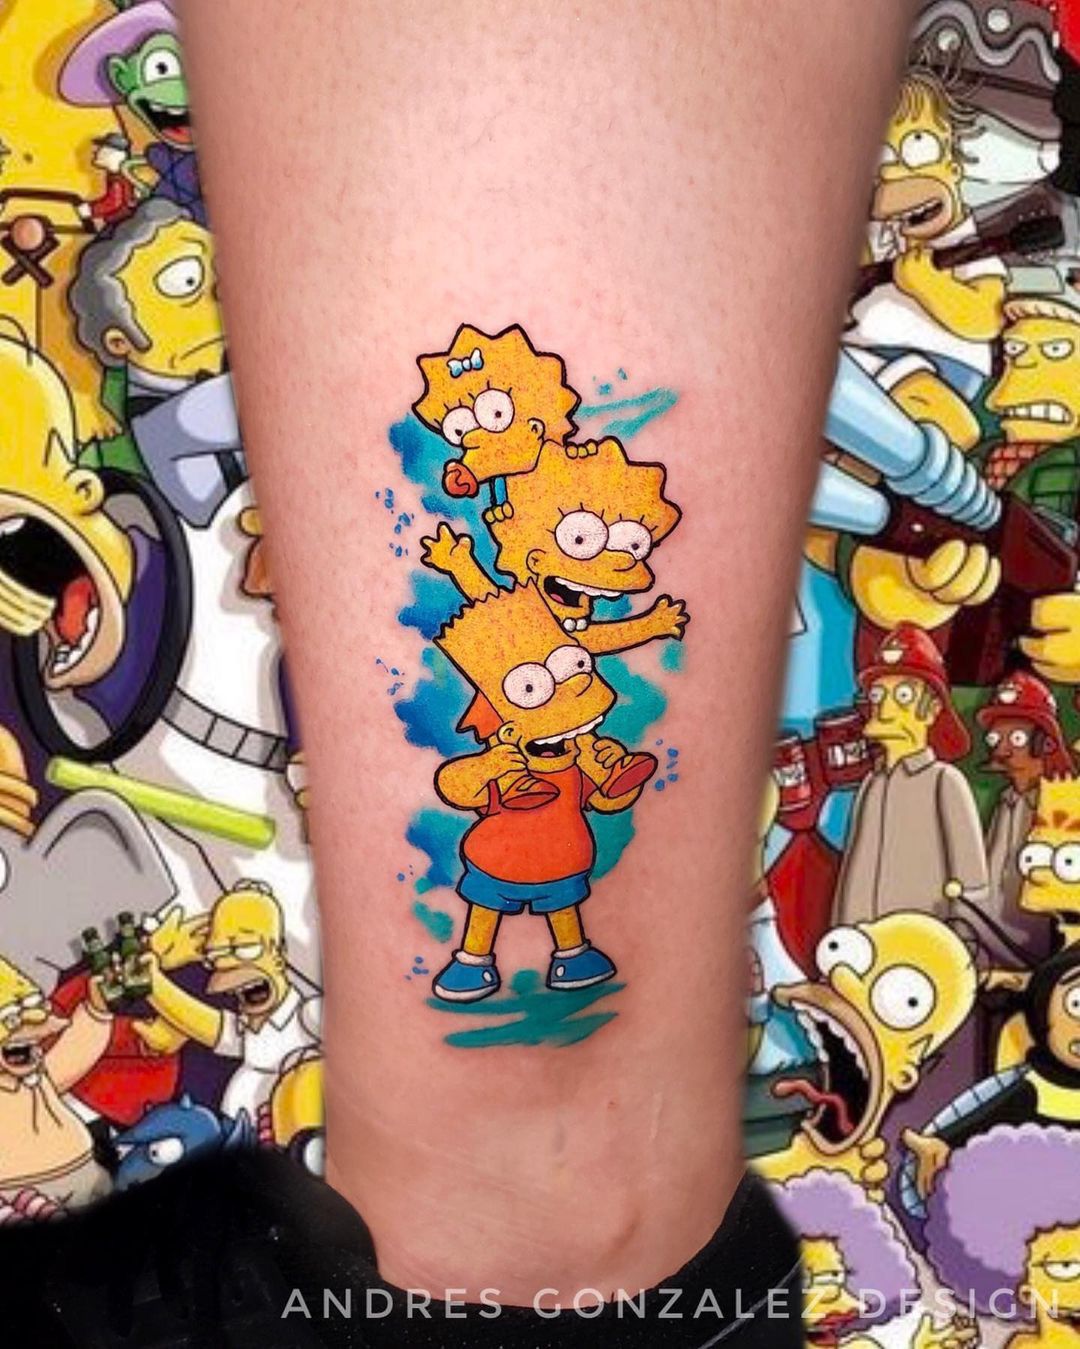 My buddy and his wifes new tattoos  rTheSimpsons